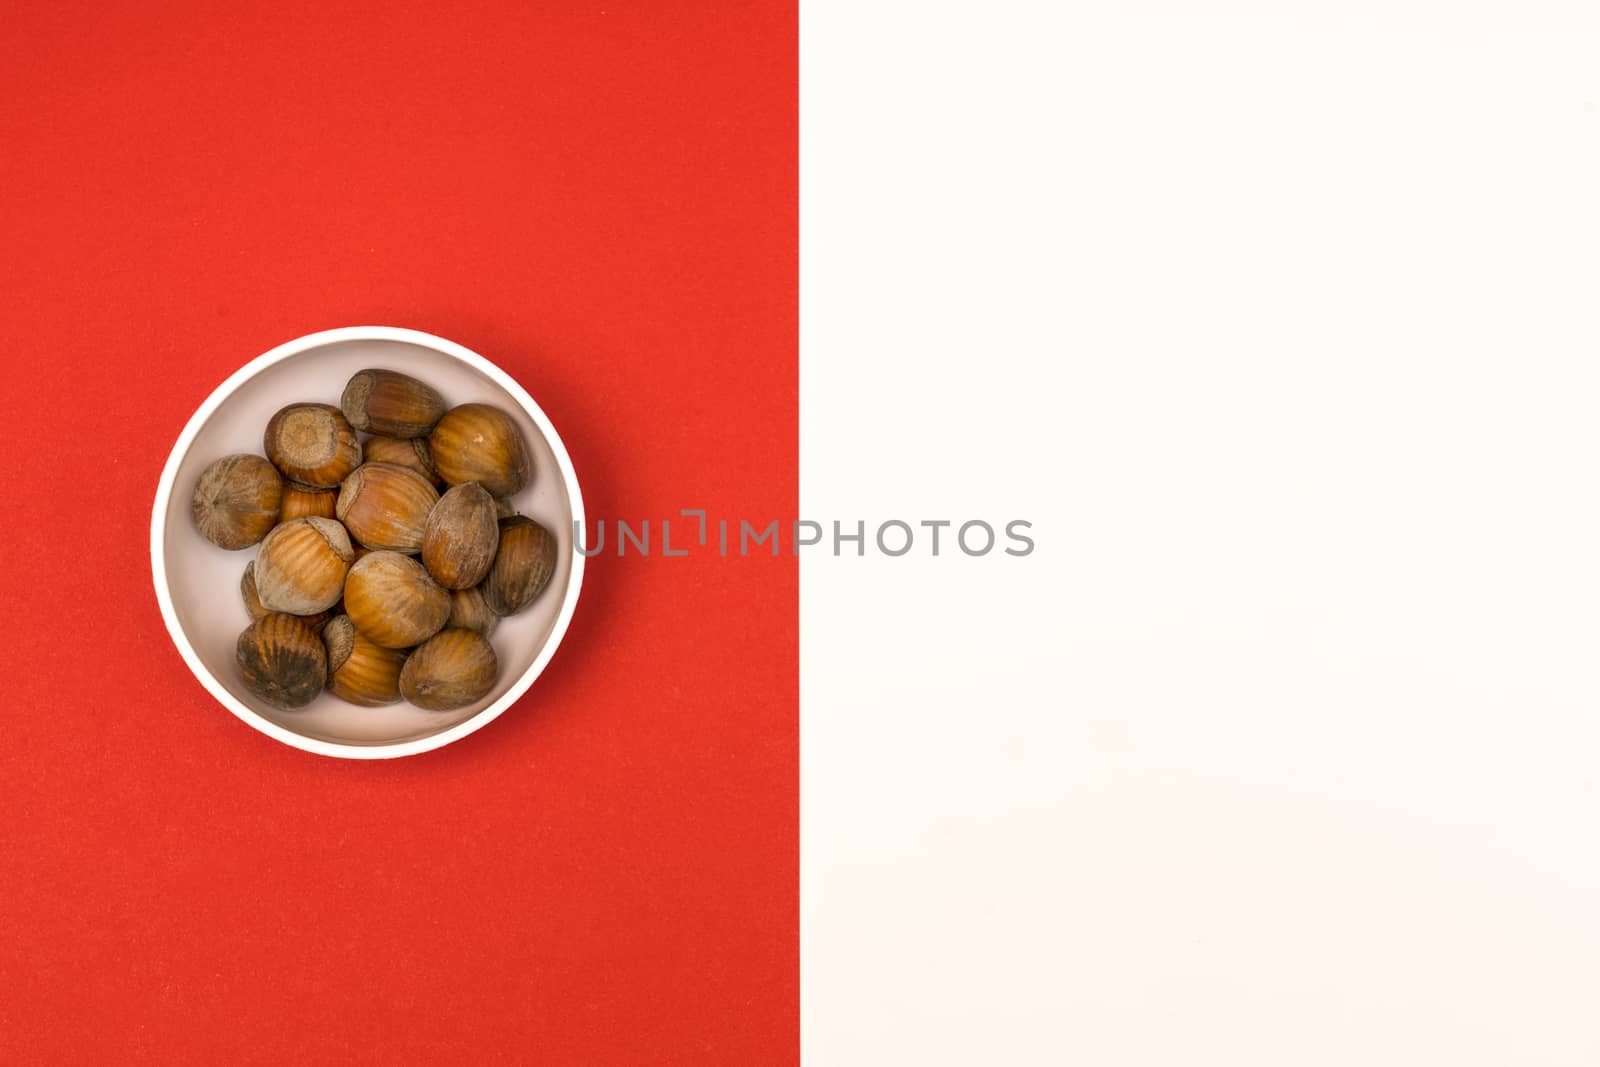 hazelnuts in a bowl on a colored background